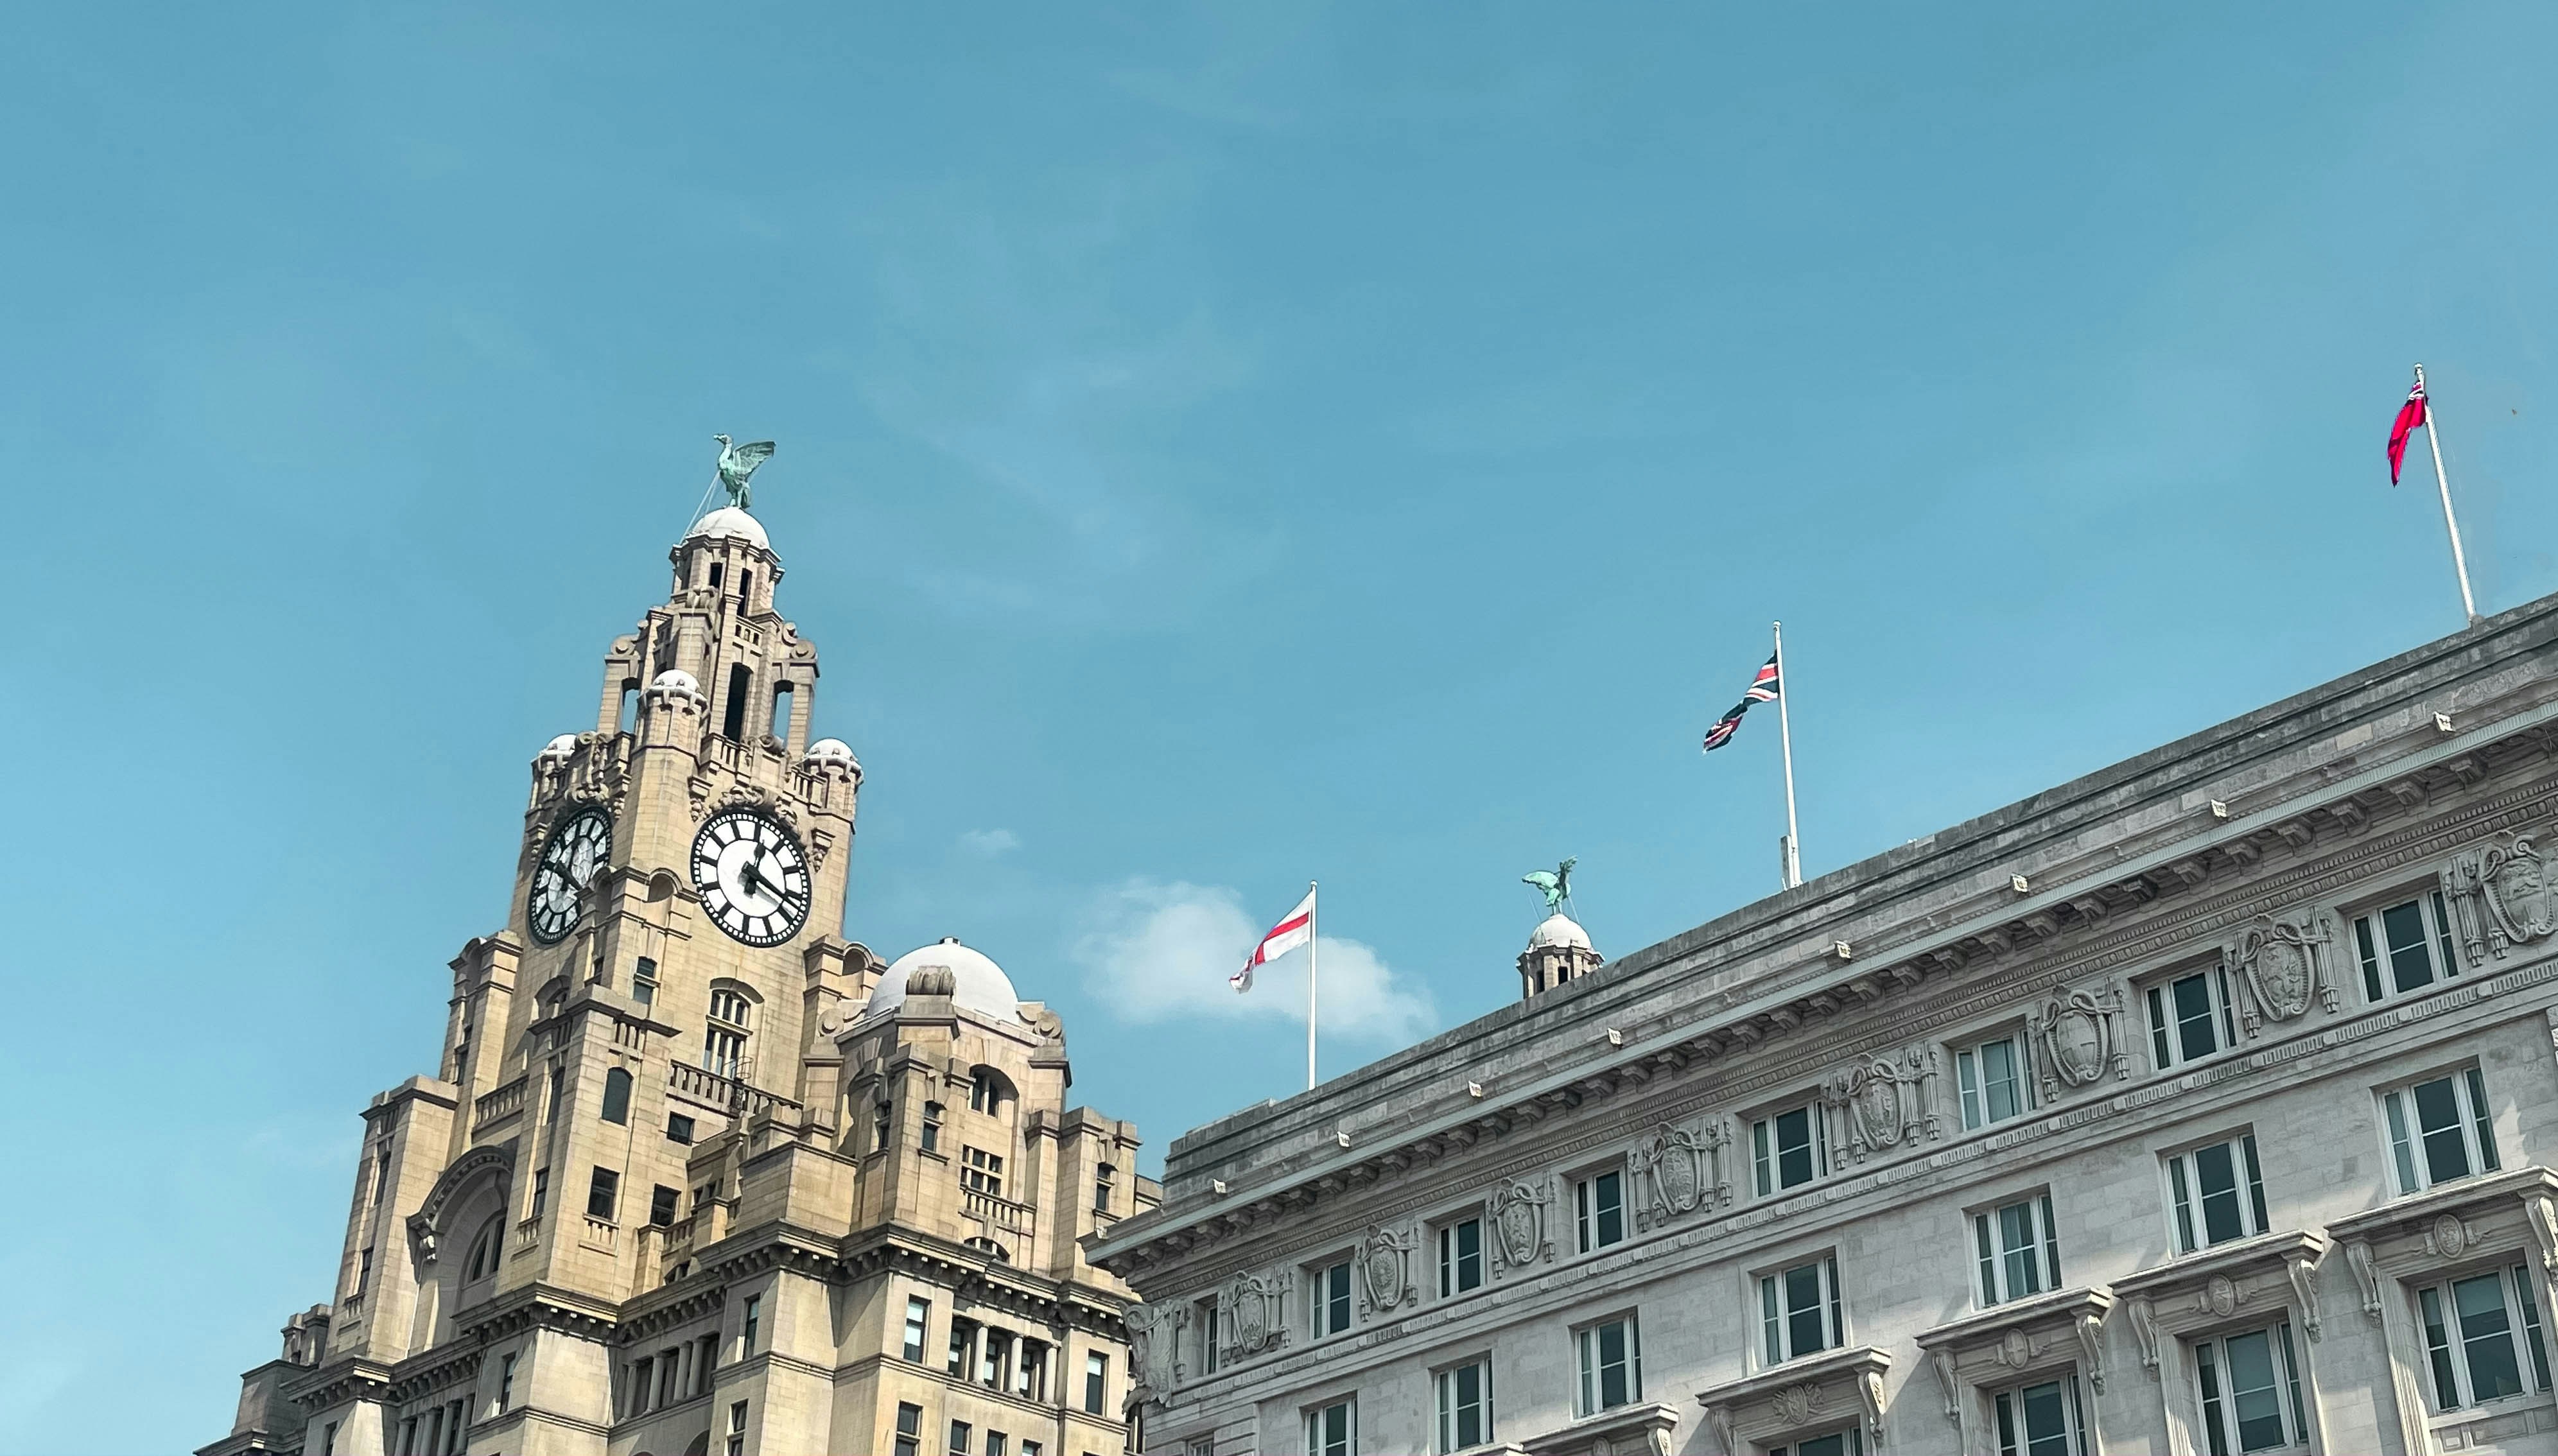 The Liver Building at Pier Head, Liverpool.